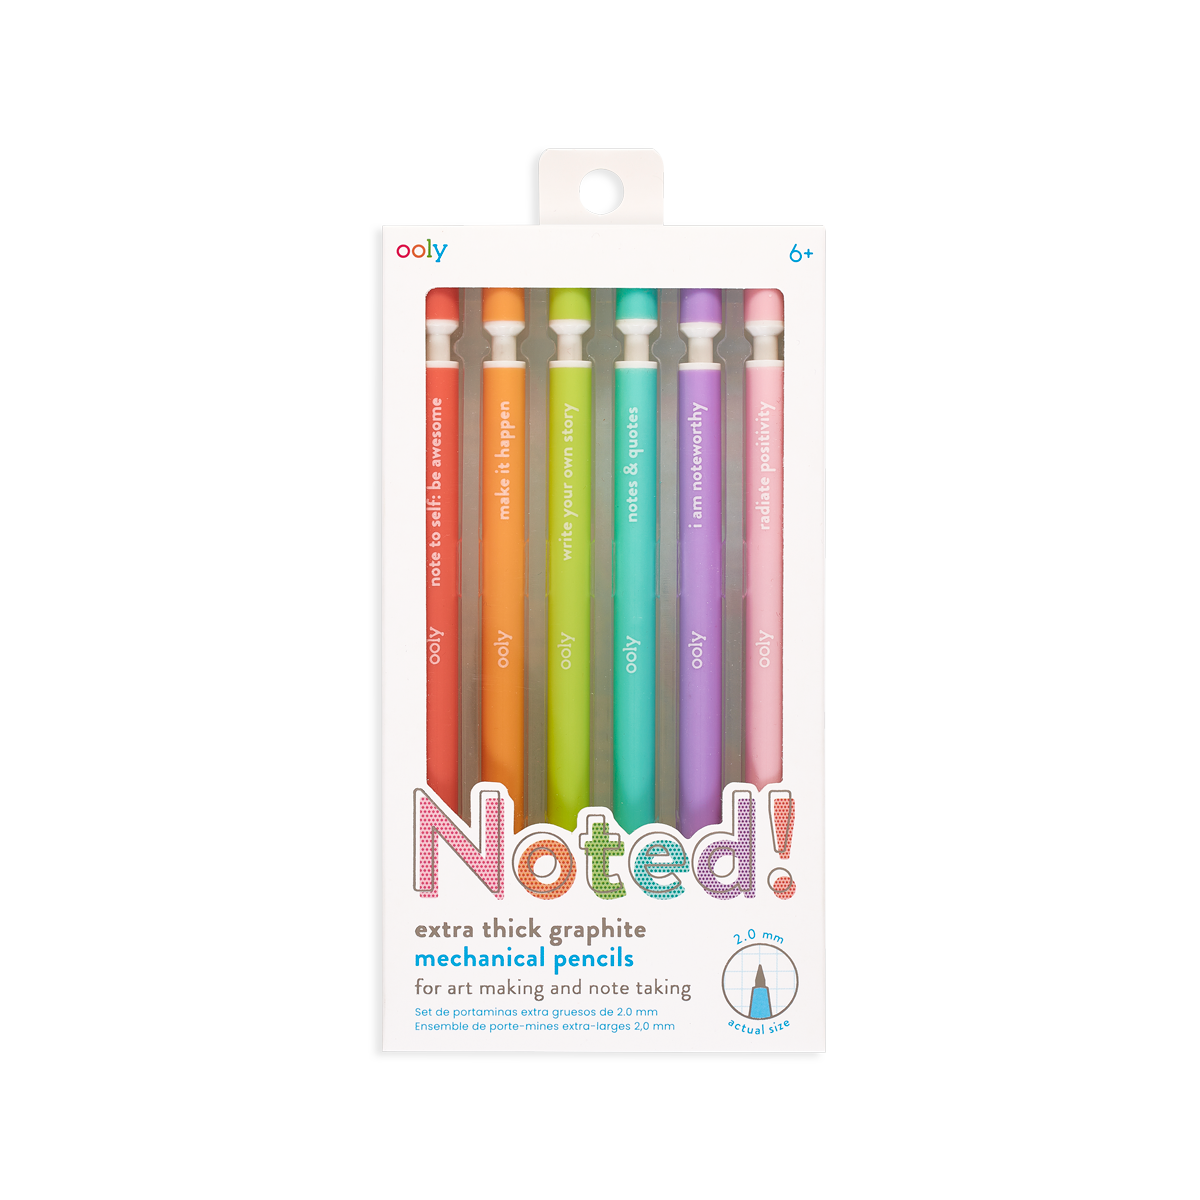 Noted! Extra Thick Graphite Mechanical Pencils - Set of 6 - OOLY